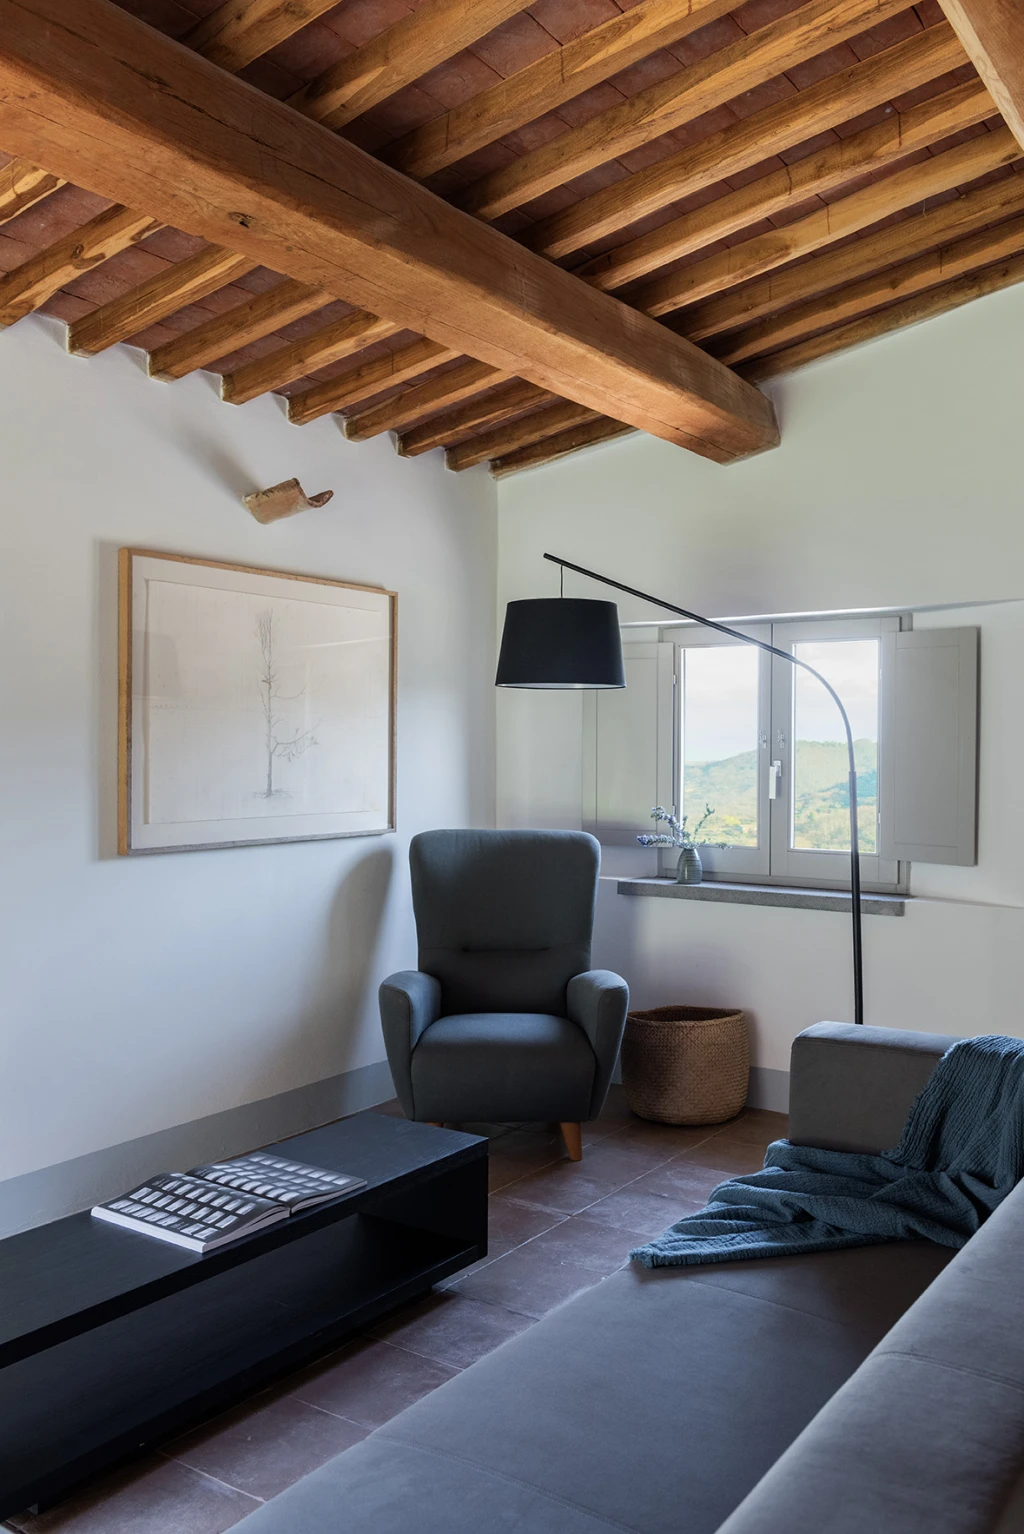 The luxury contemporary suite; occupancy 2 guests. Stunning view of the Etruscan hill-tops